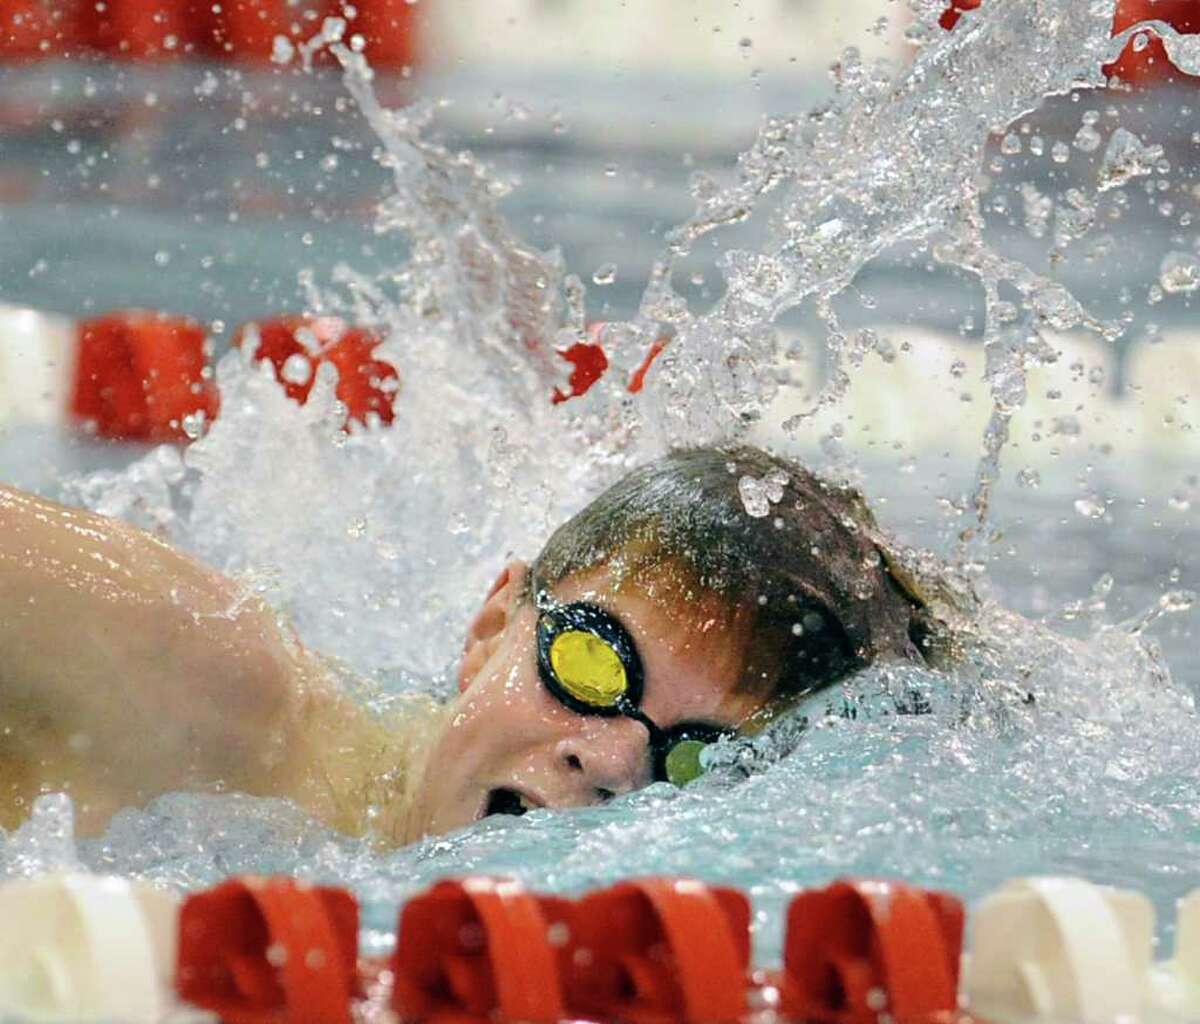 Swimmer Thomas Dillinger of Greenwich High School competes in the 200 freestyle event boys swim meet between Greenwich High School and New Canaan High School at Greenwich High School, Tuesday, Dec. 20, 2011.